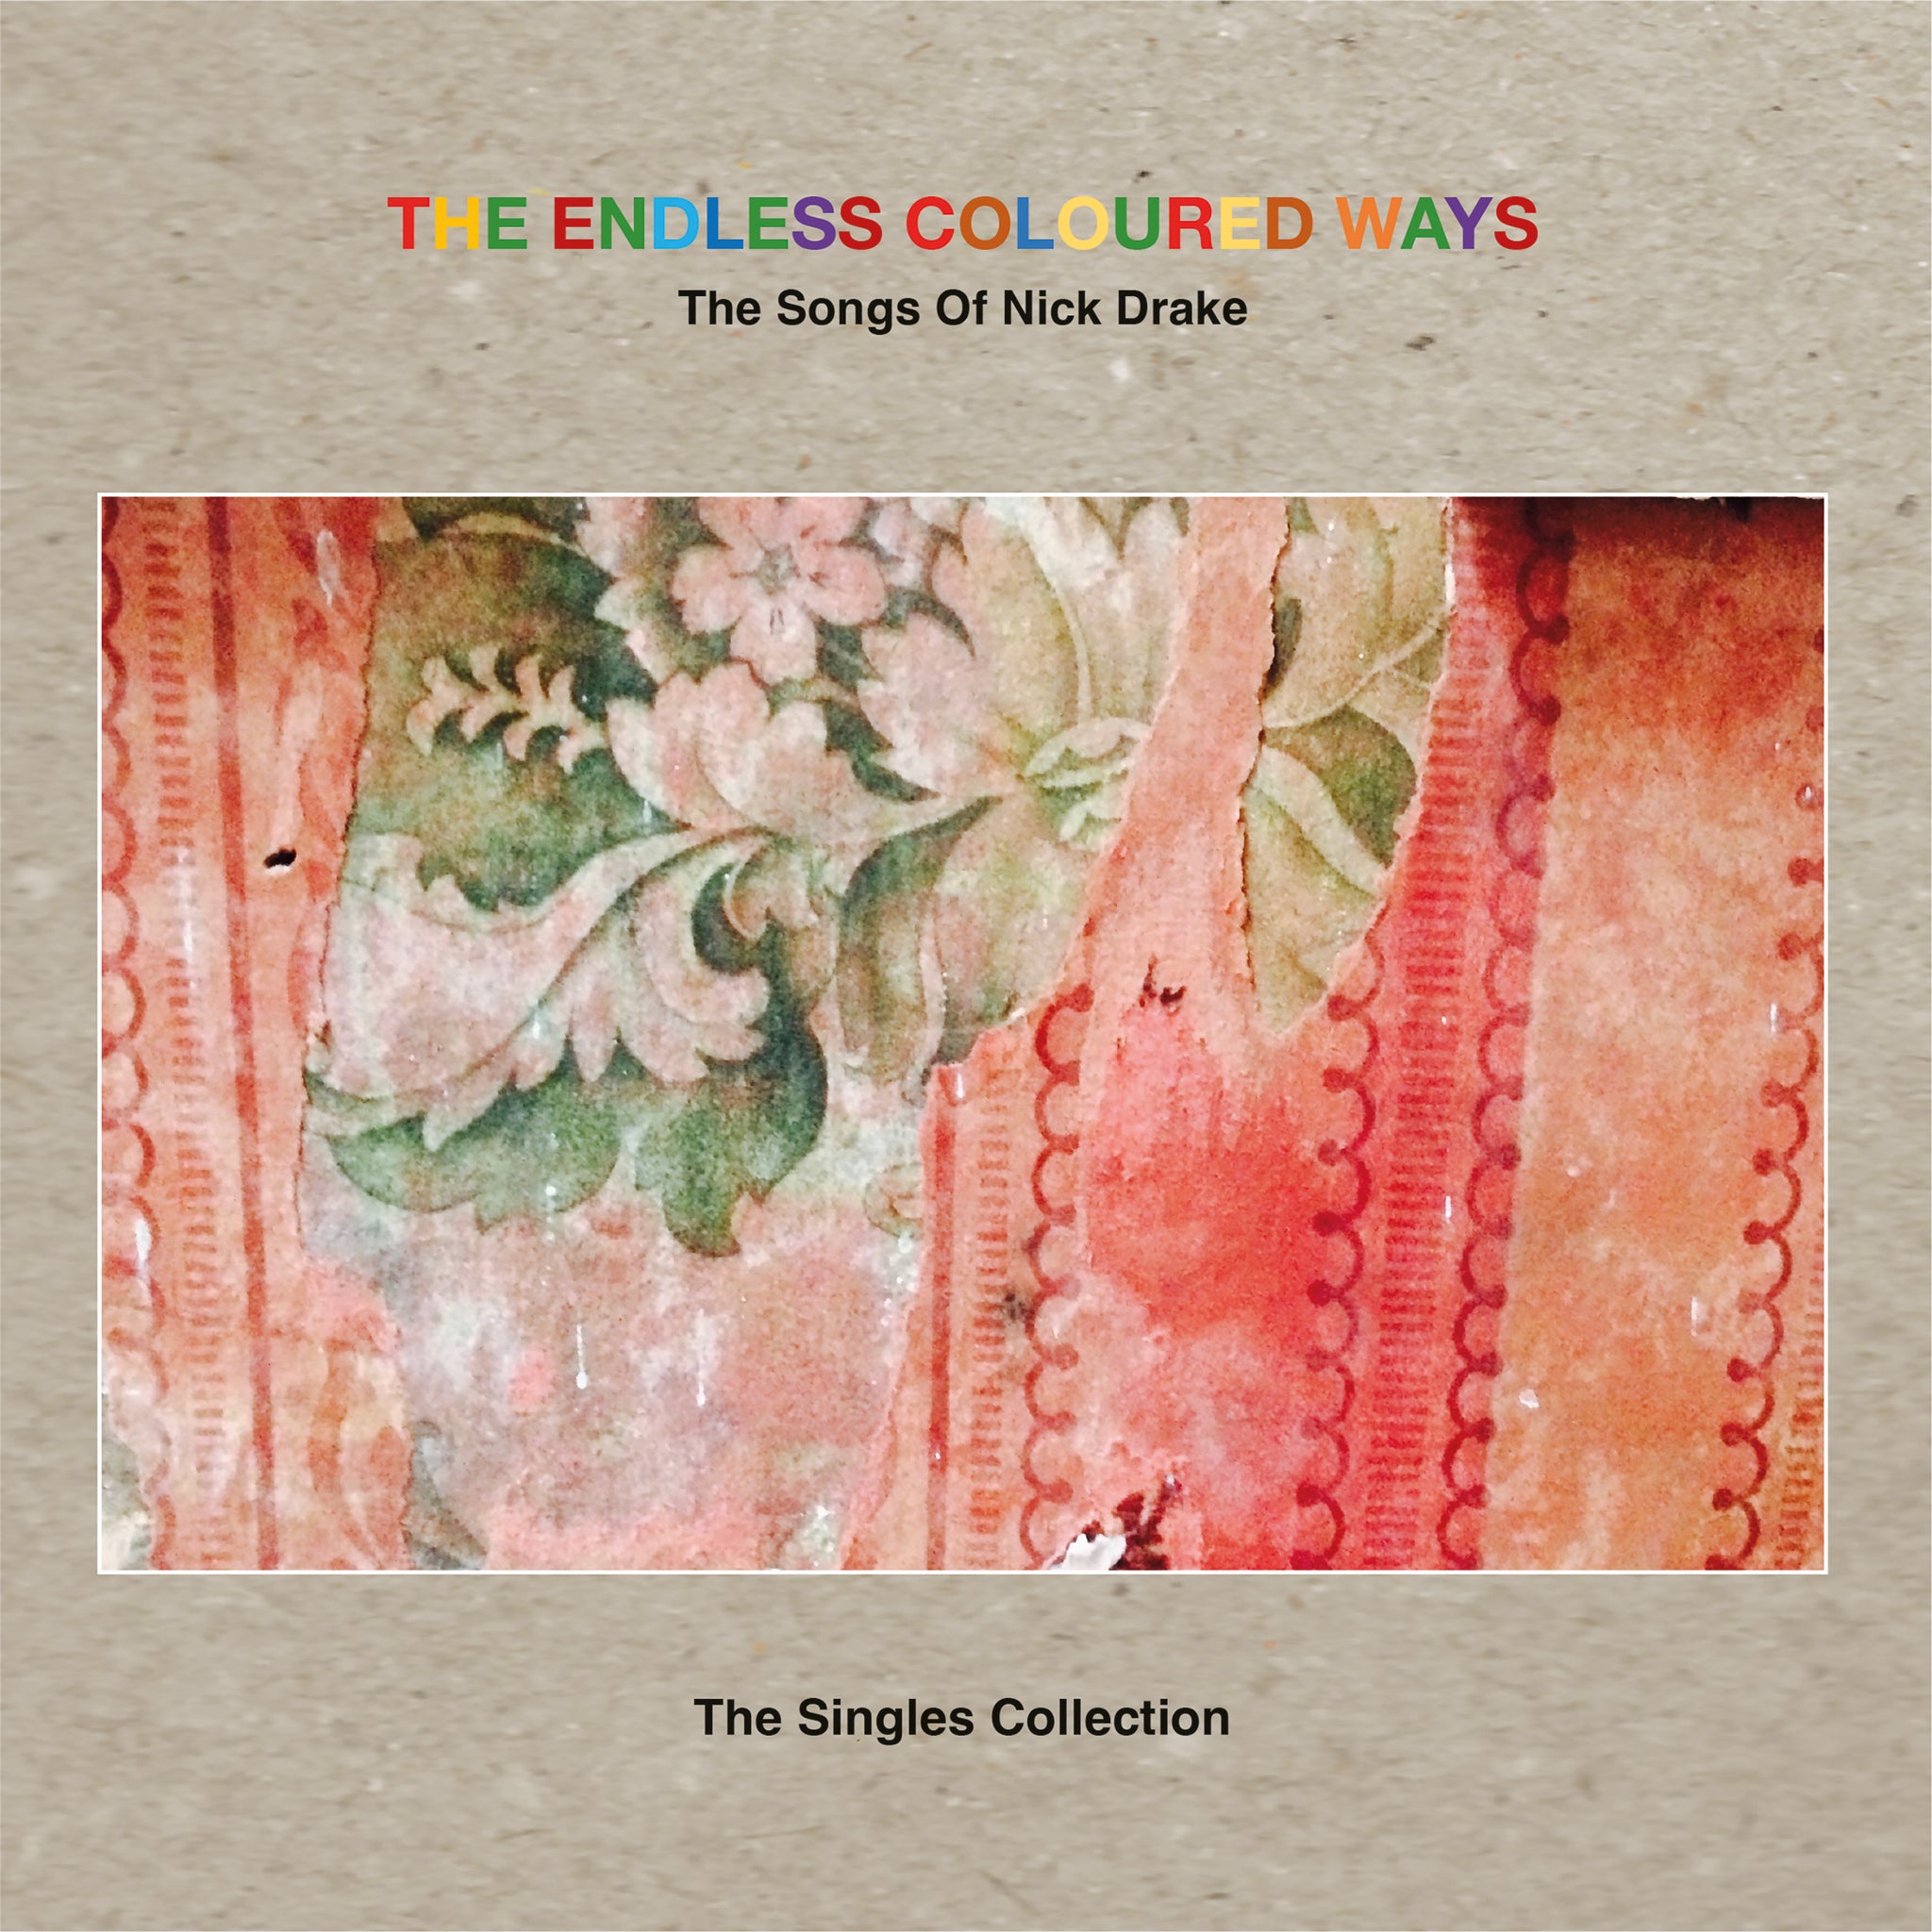 VARIOUS ARTISTS - The Endless Coloured Ways: The Songs Of Nick Drake - The Singles Collection - 7" Singles Boxset  [RSD 2024]